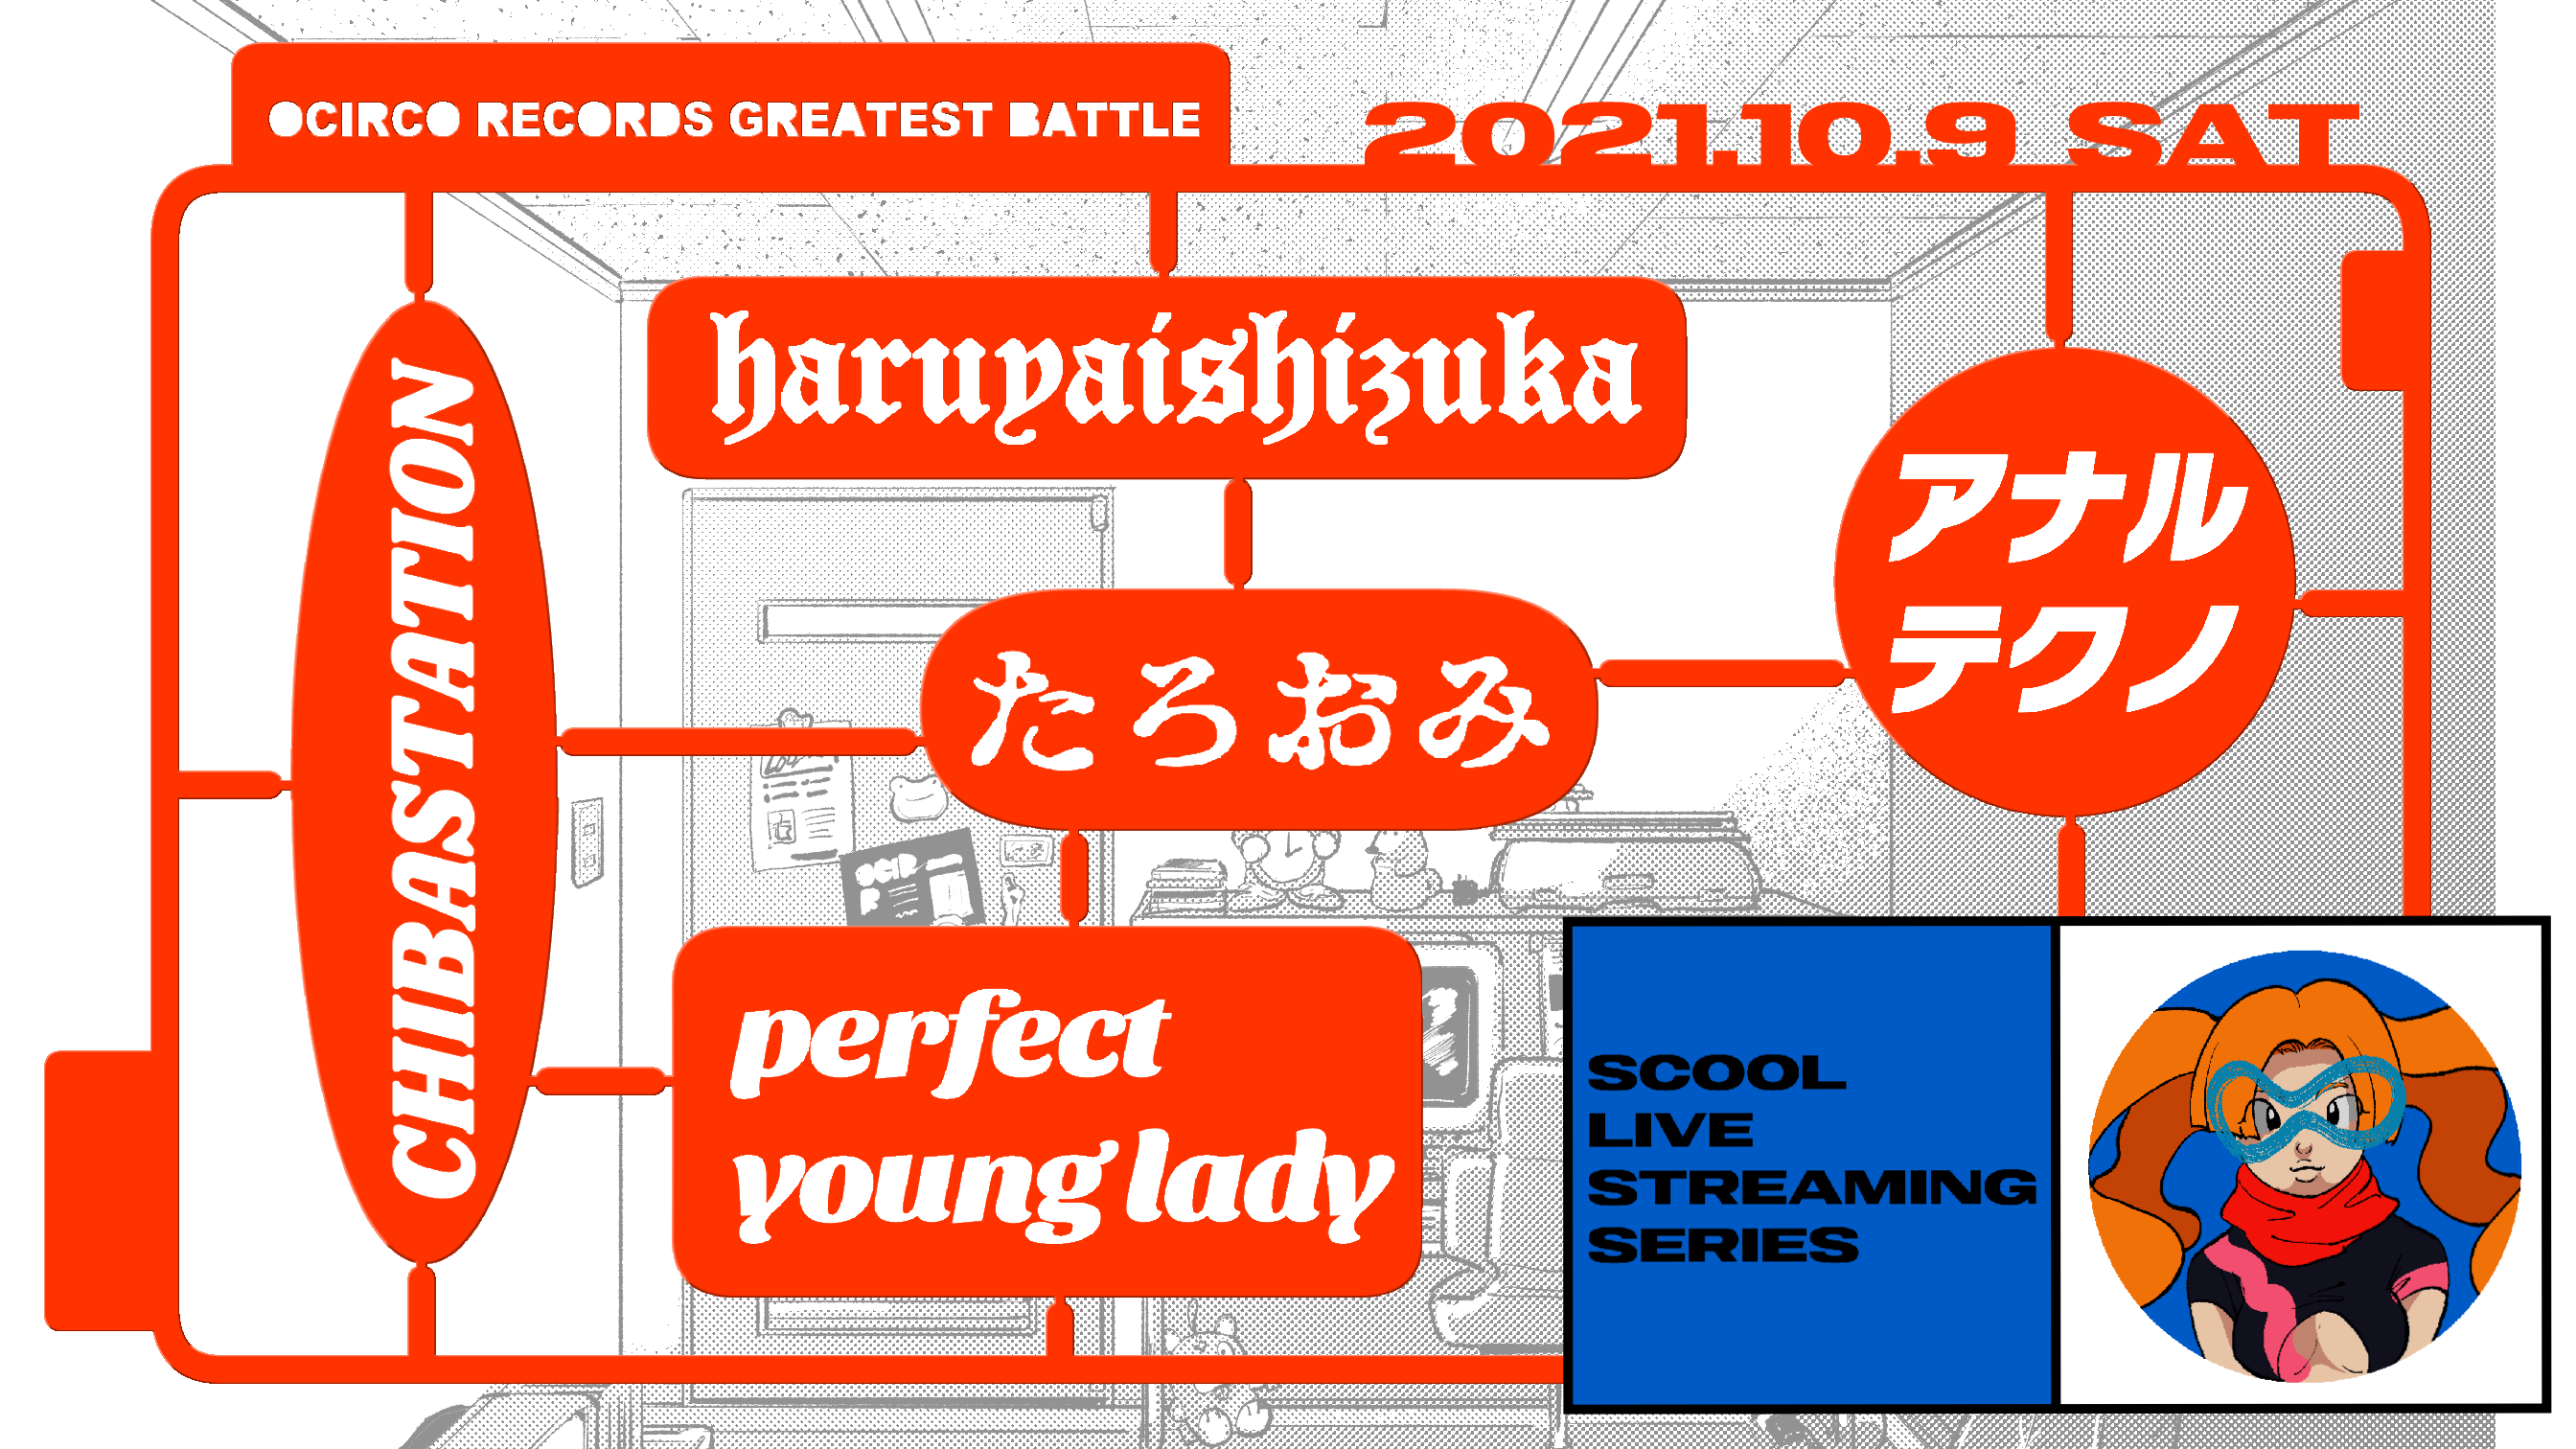 SCOOL Live Streaming Series <br>『OCIRCO RECORDS GREATEST BATTLE』